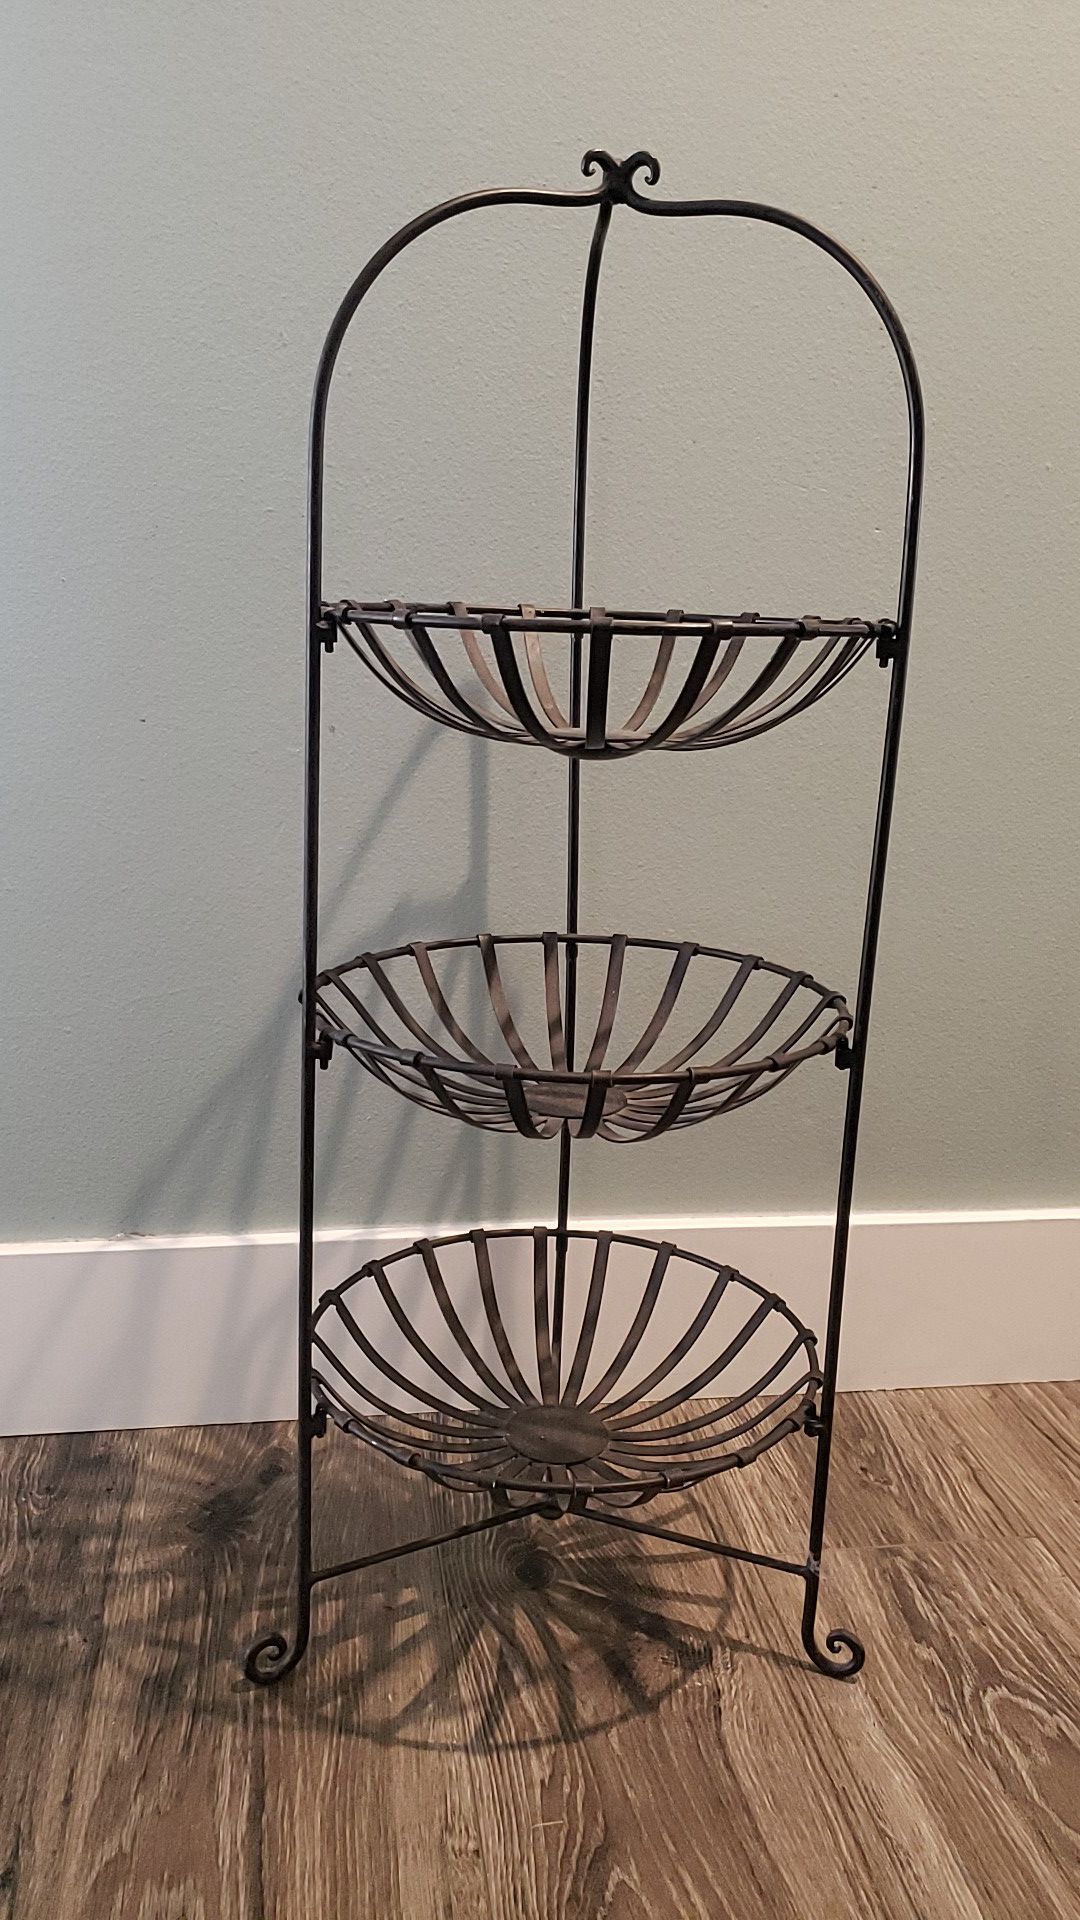 Metal 3 tiered basket shelves. Approx. 32 inch tall